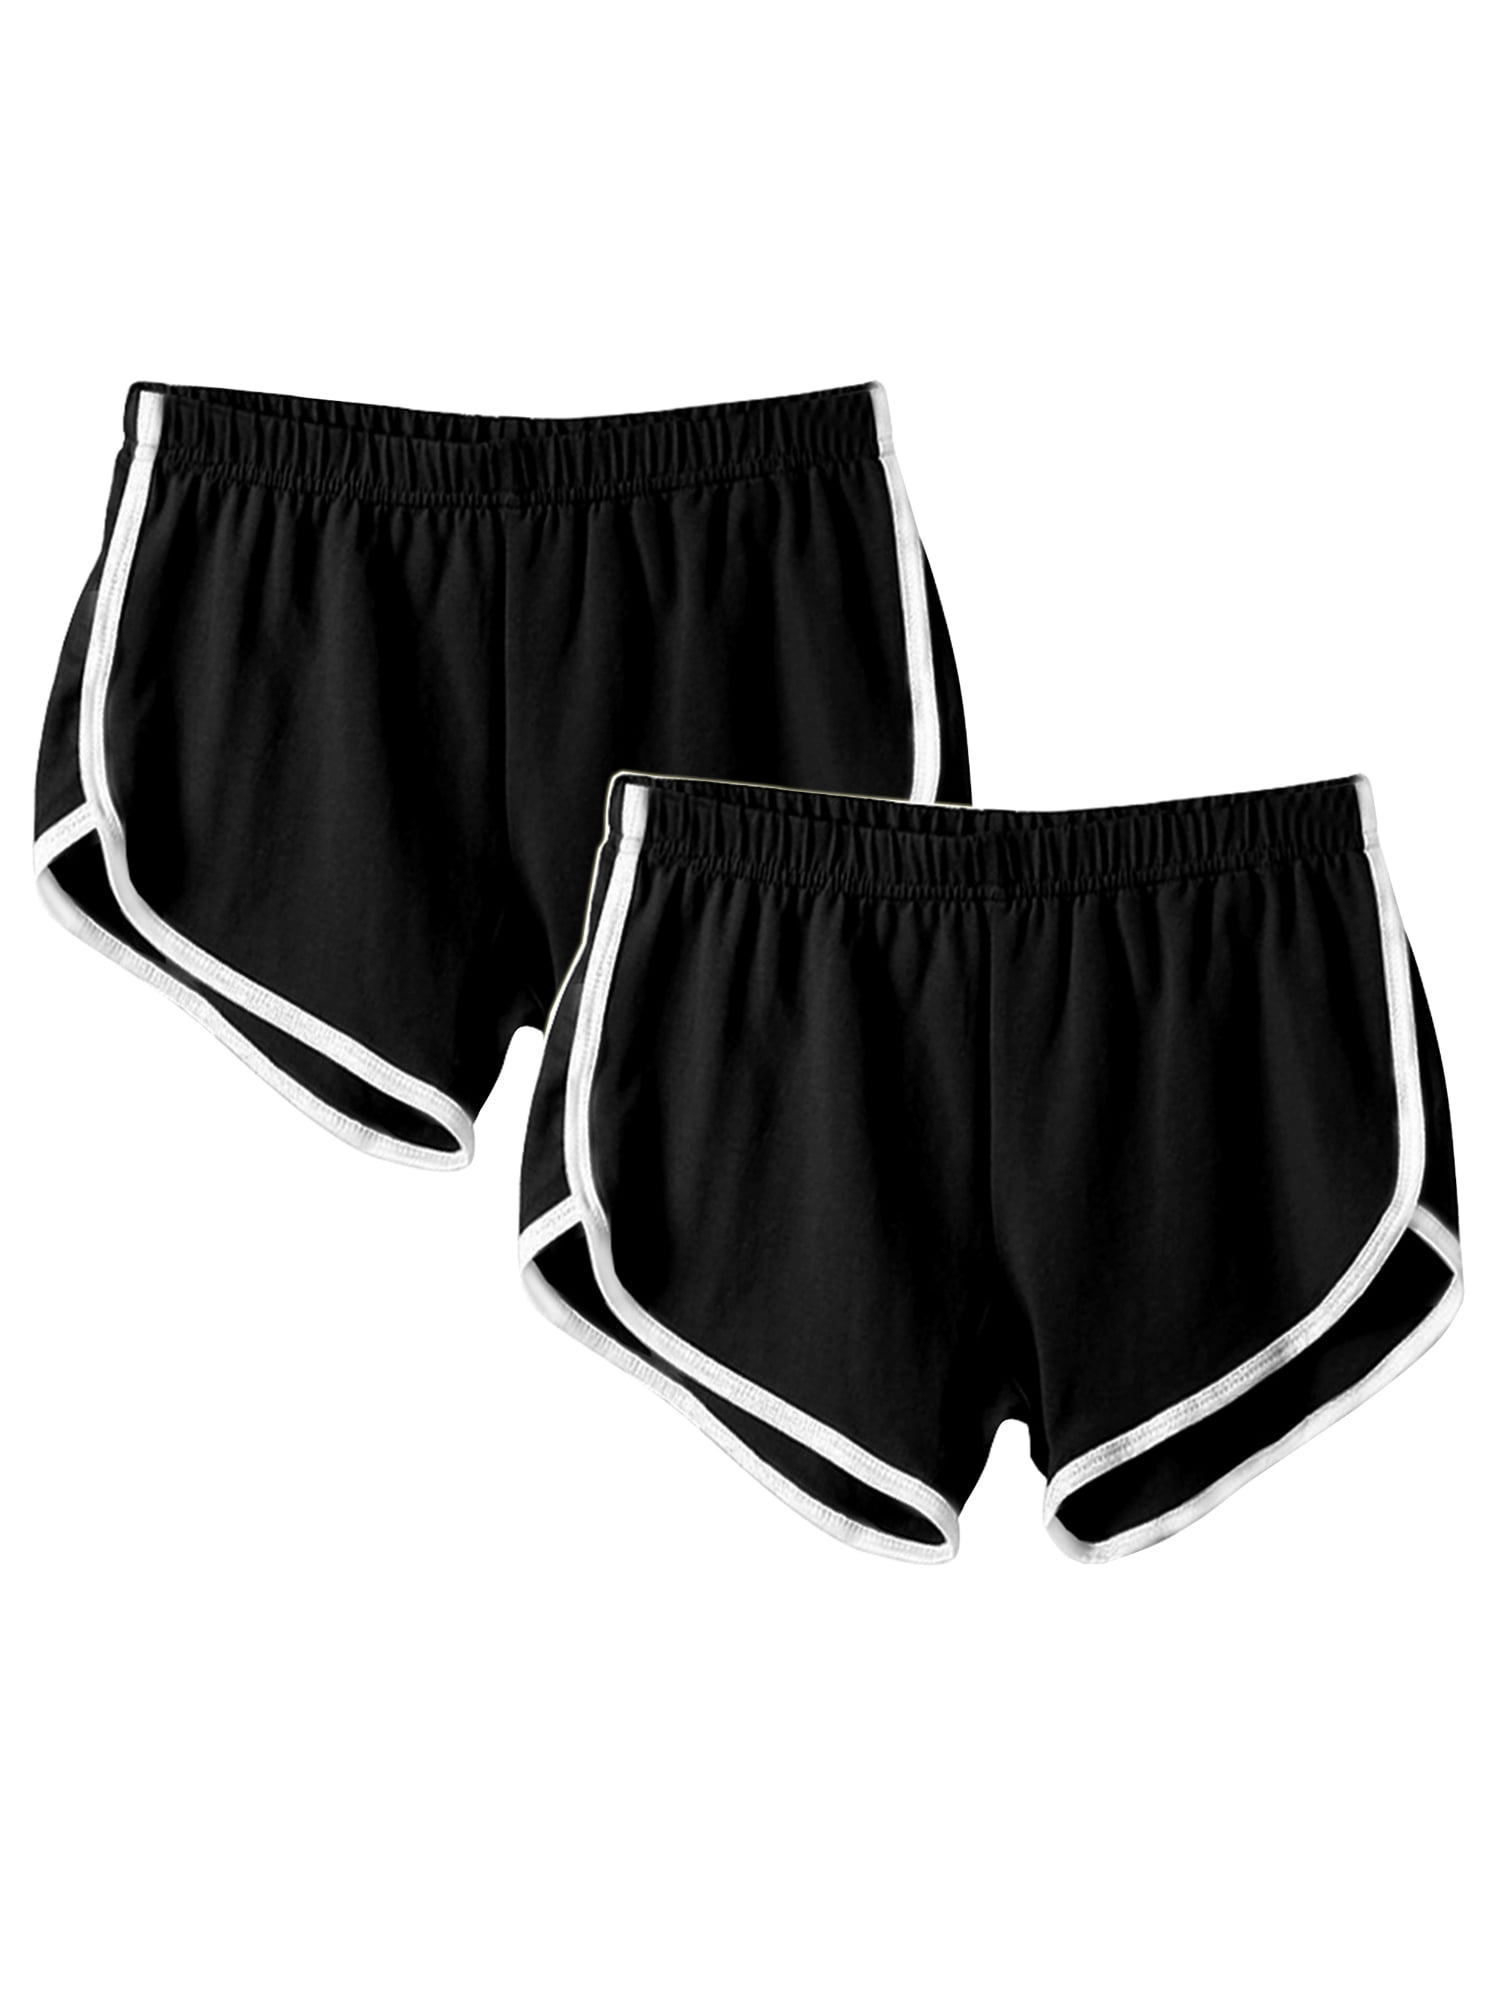 32" Waist Details about   NEW Mens Black Sports Shorts Activewear 